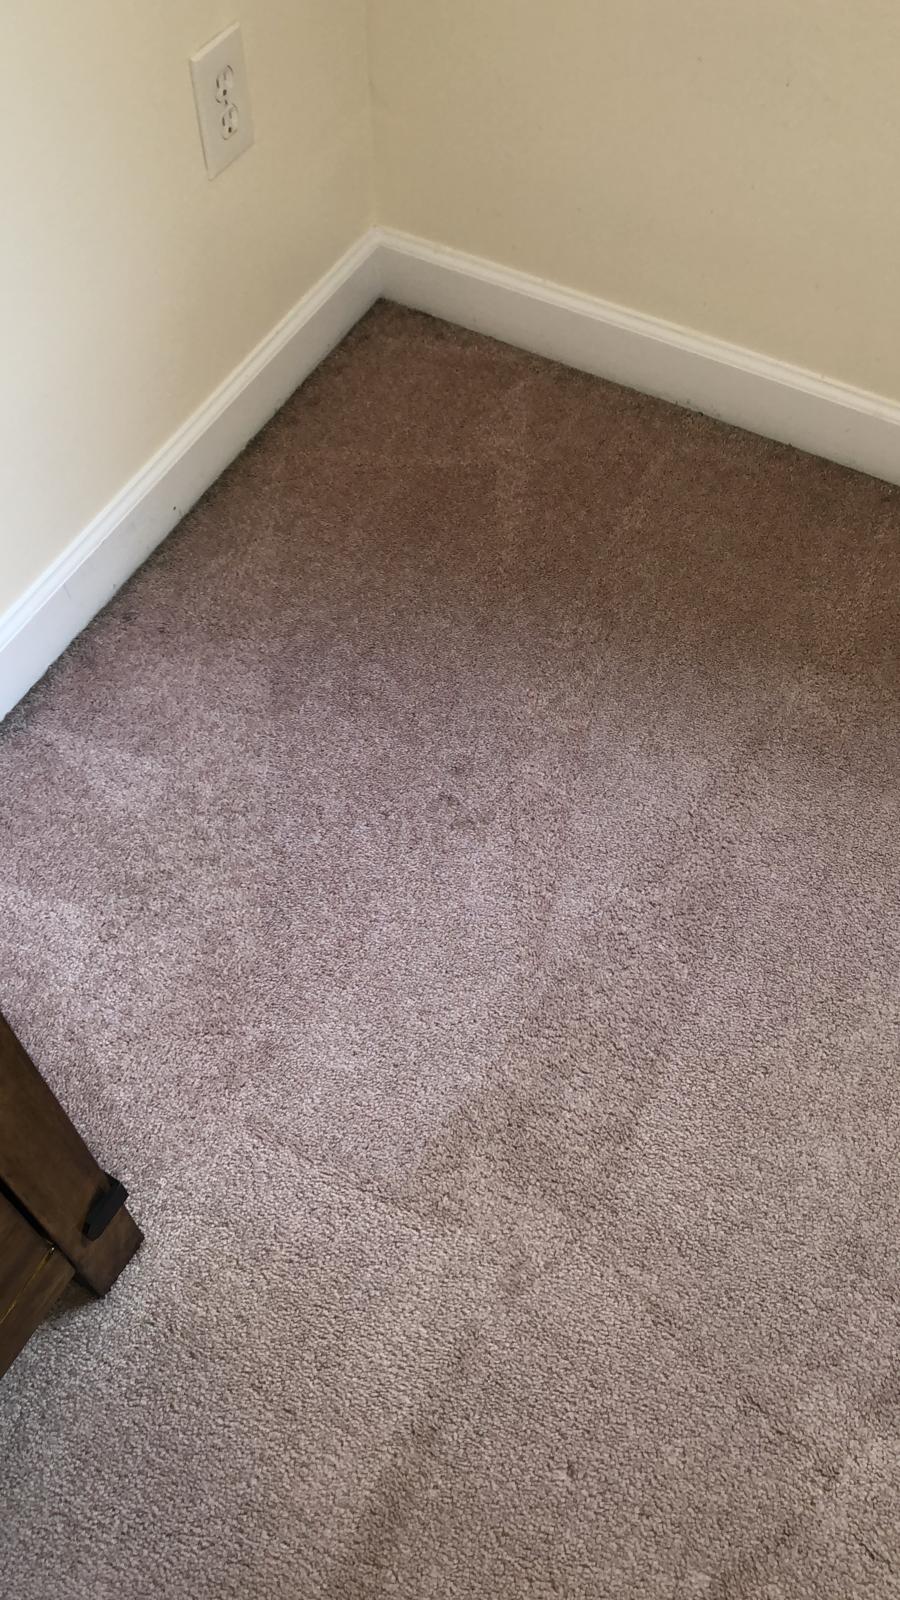 Elite Rug & Carpet Cleaning | 254 7th Ave, Brooklyn, NY 11215 | Phone: (718) 522-5104